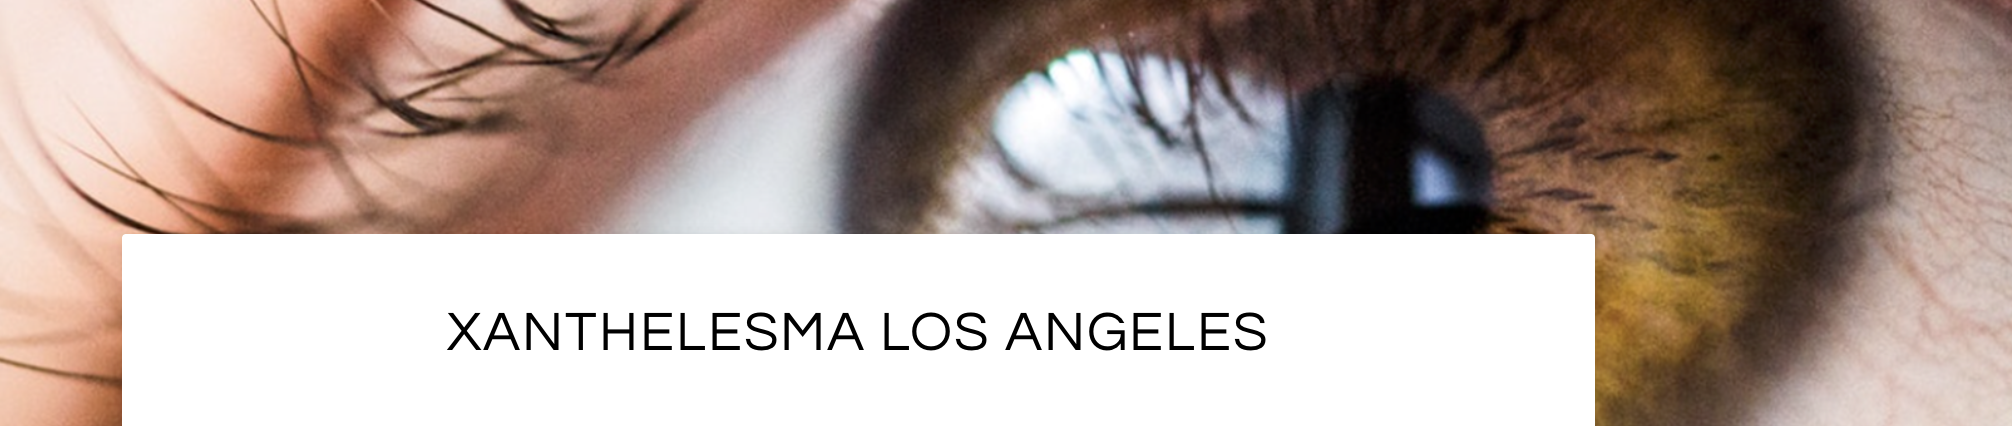 Xanthelesma Removal in Santa Monica and Beverly Hills